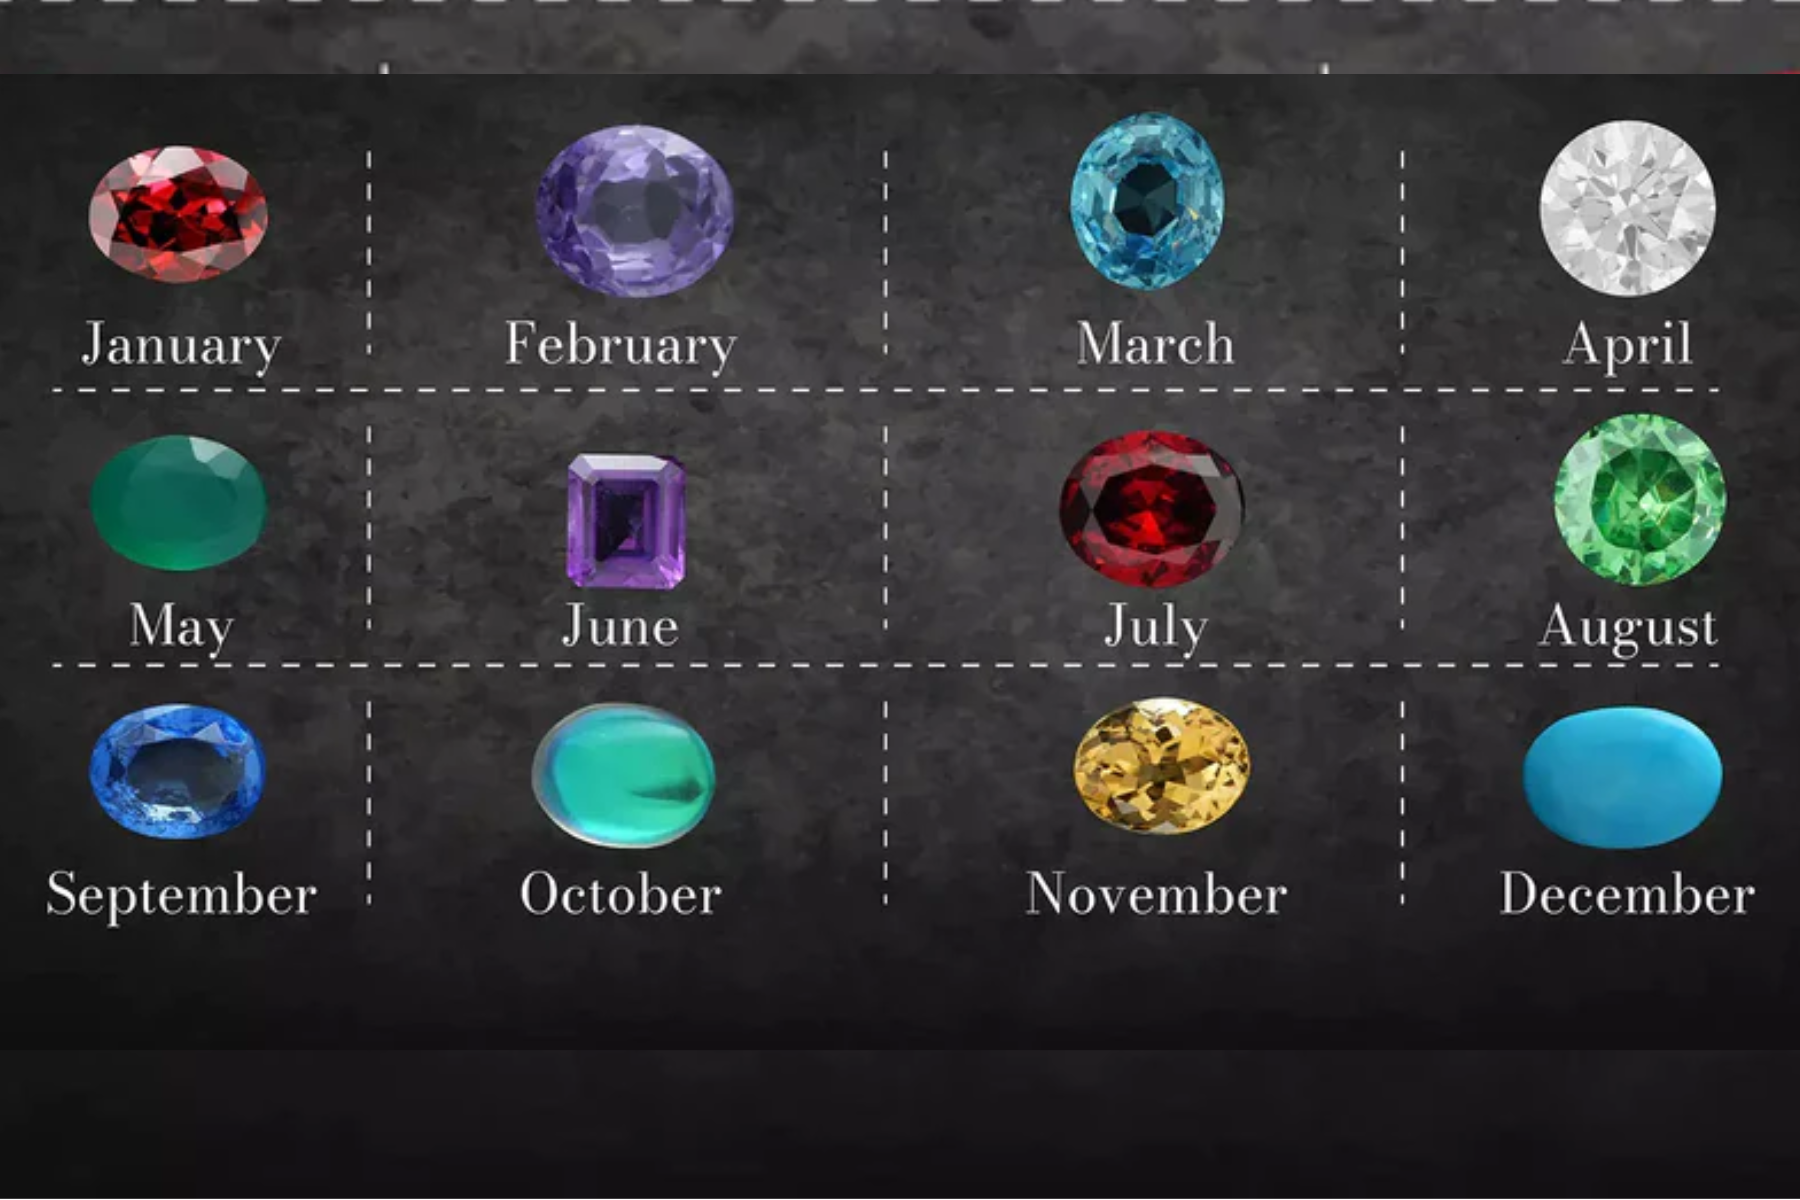 Twelve birthstones, one for each month of the year